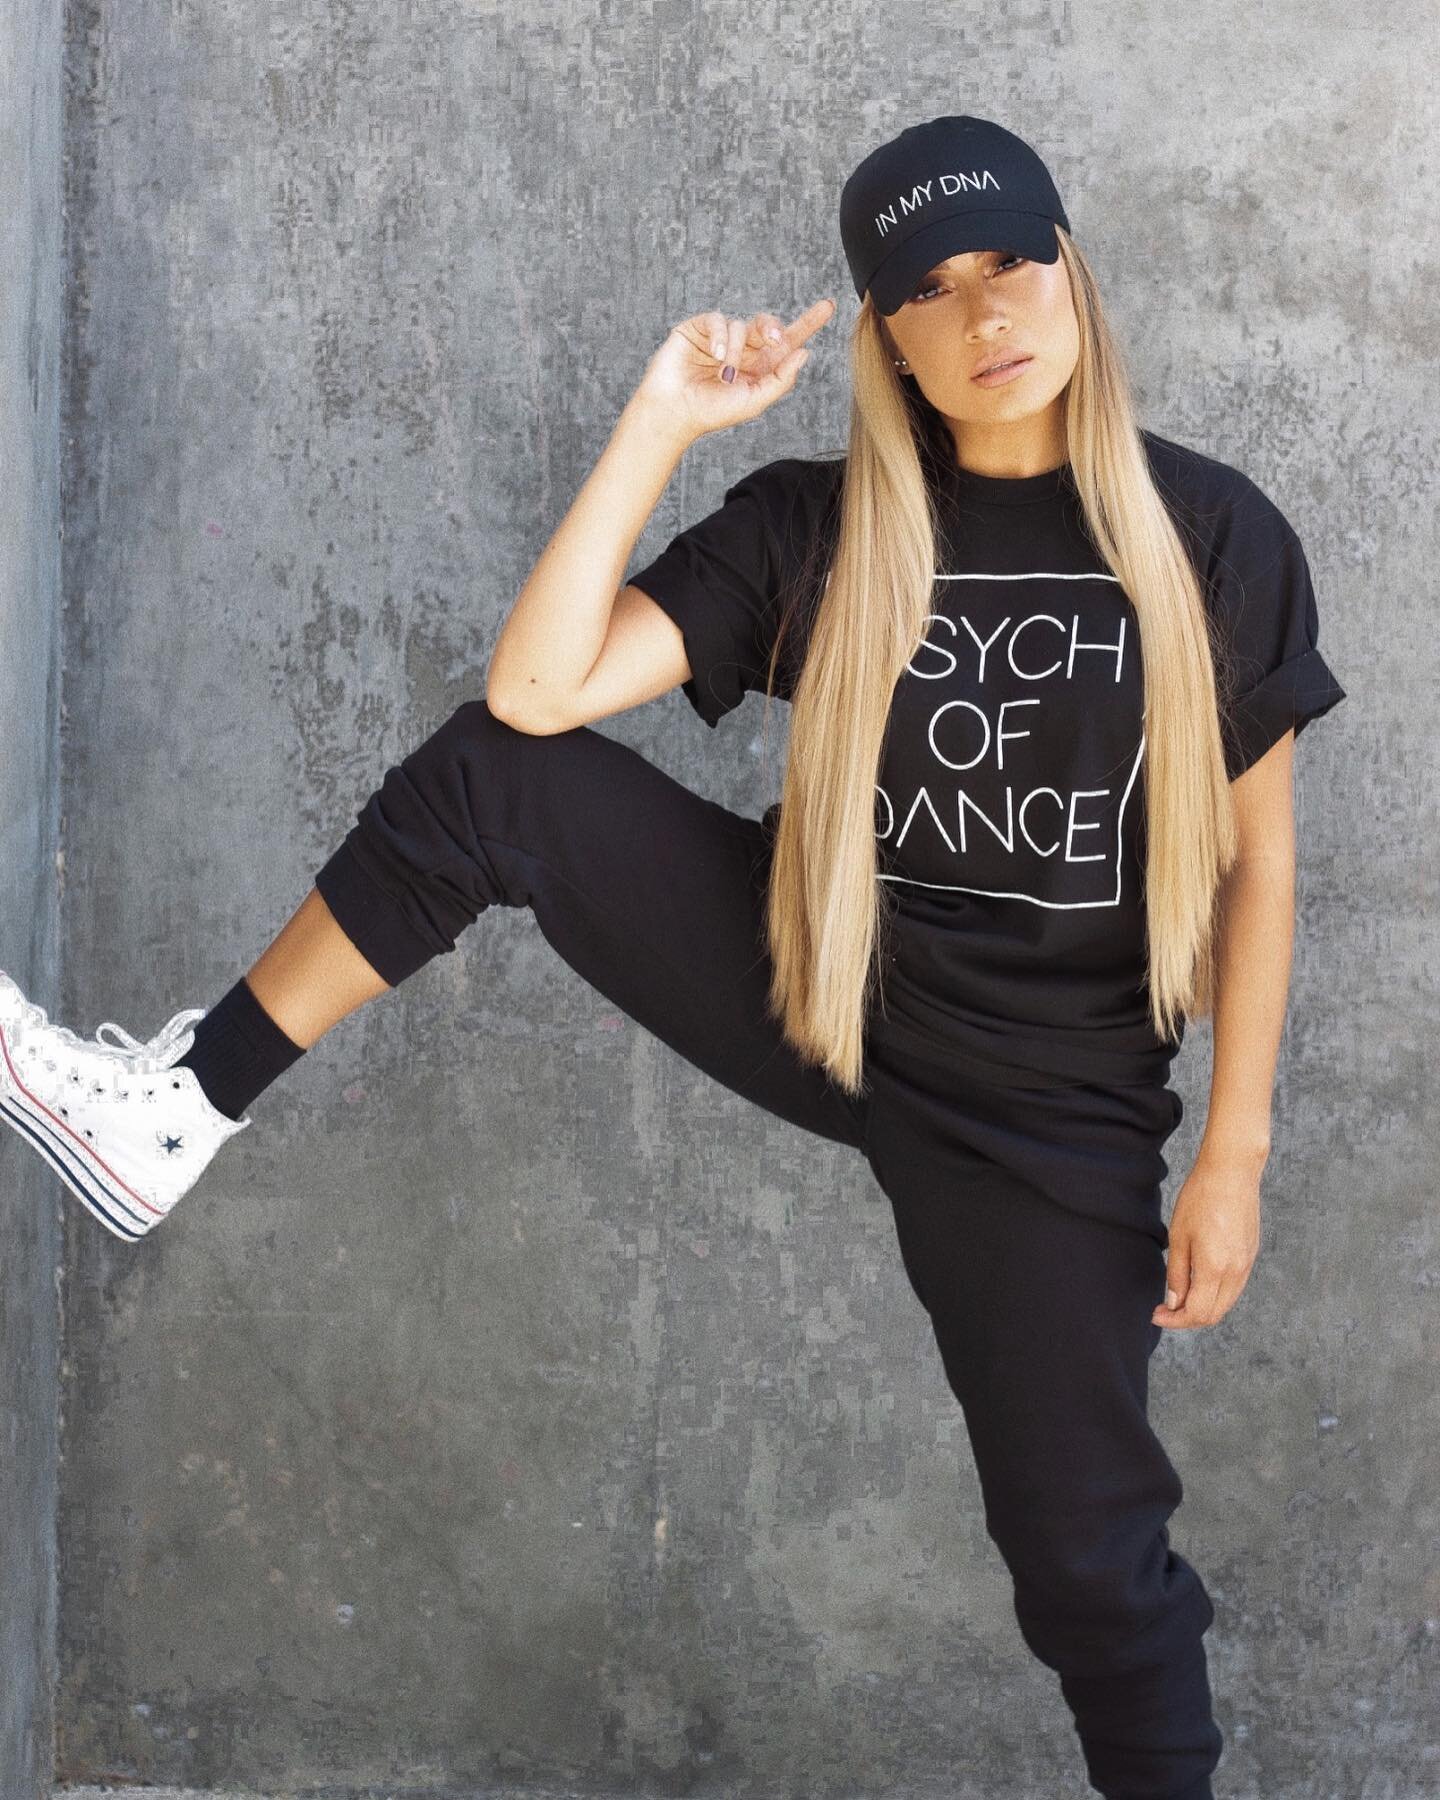 you can now invest in yourself for the @psych_ofdance guiDANCE virtual program⁣
⁣
🔛 i am excited to announce Psych of Dance guidance program for 2021 applications are now OPEN!⁣ grab your spots now- spots fill up quickly. 
⁣
☑️ Psych of Dance Guidan